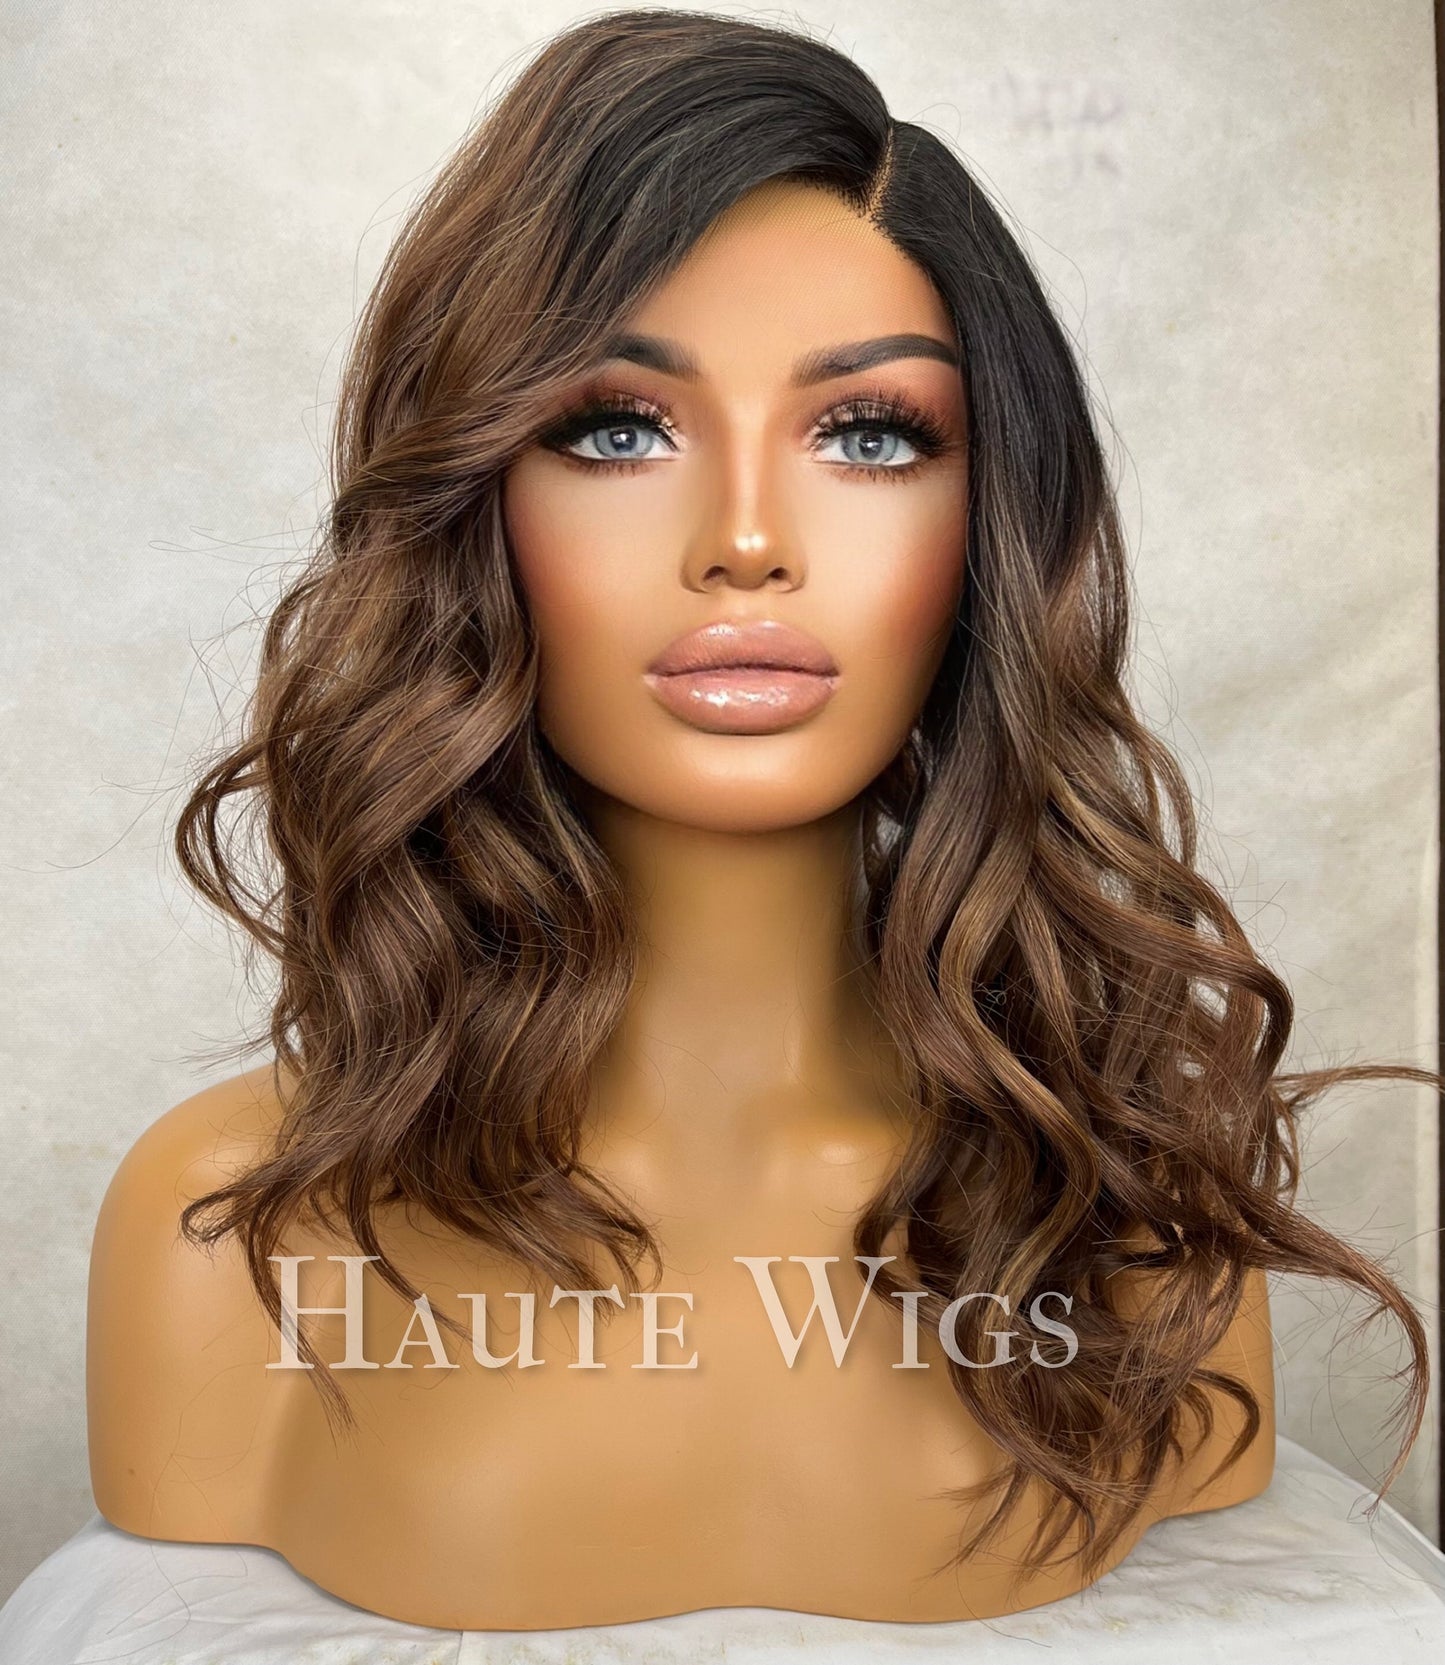 Natural Beauty - 14 inch Brunette Brown Wig Warm Highlights Hair Lace Front Wavy Human Hair synthetic Blends haute wigs gift for her